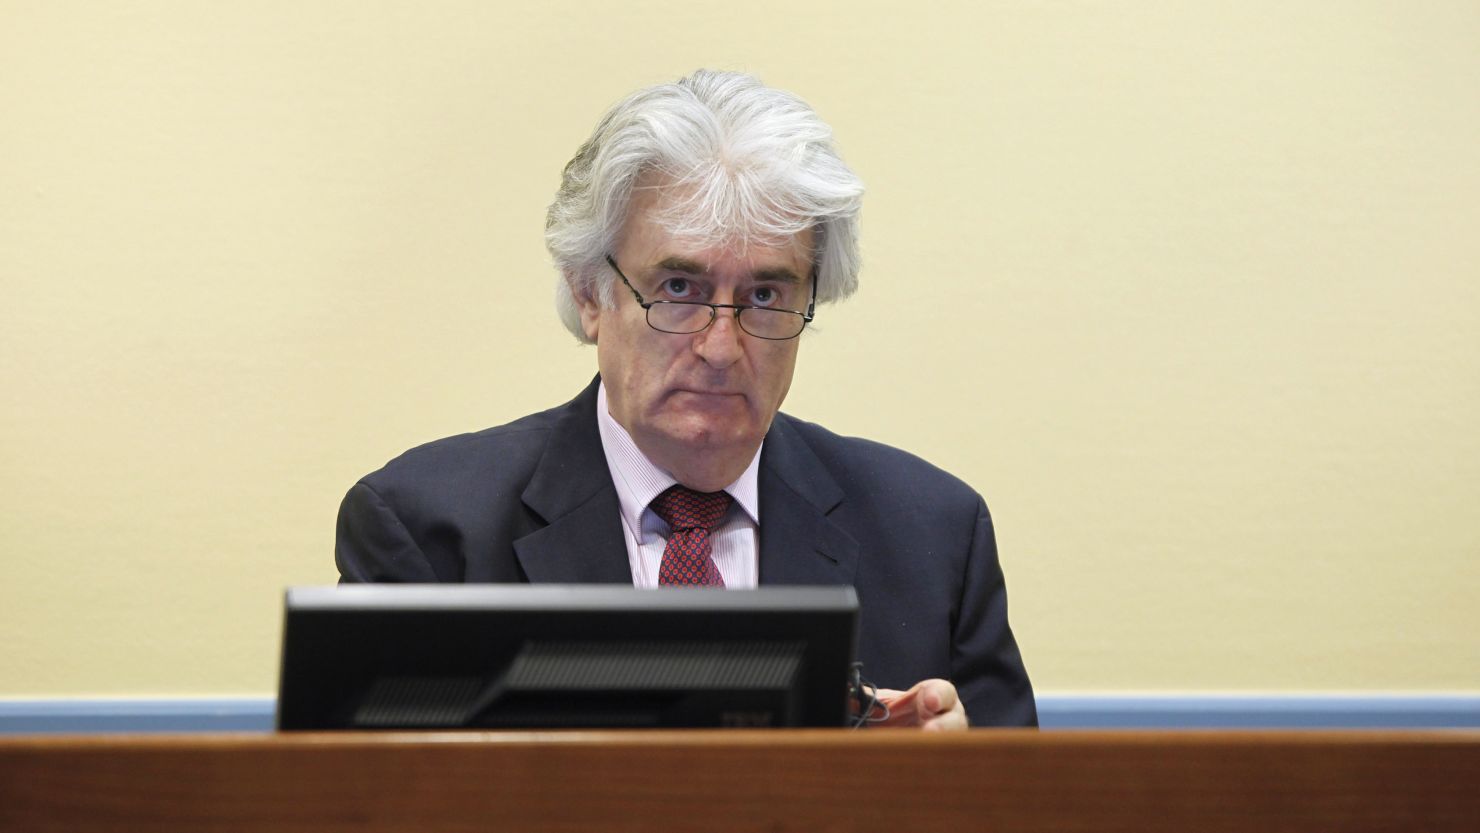 Former Bosnian Serb leader Radovan Karadzic looks up during his first court appearance since the start of his genocide trial in the courtroom of the International Criminal Tribunal for the former Yugoslavia (ICTY) in the Hague on November 3, 2009.Karadzic has refused to leave his jail cell since the trial started on October 26, saying he needs more time to review more than a million pages of prosecution evidence and the statements of hundreds of witnesses. He is charged with 11 counts of genocide, war crimes and crimes against humanity for his role in the 1992-95 Bosnian war that claimed some 100,000 lives and caused 2.2 million people to flee their homes. AFP PHOTO / ANP PHOTO / Michael Kooren netherlands out - belgium out (Photo credit should read MICHAEL KOOREN/AFP/Getty Images) 